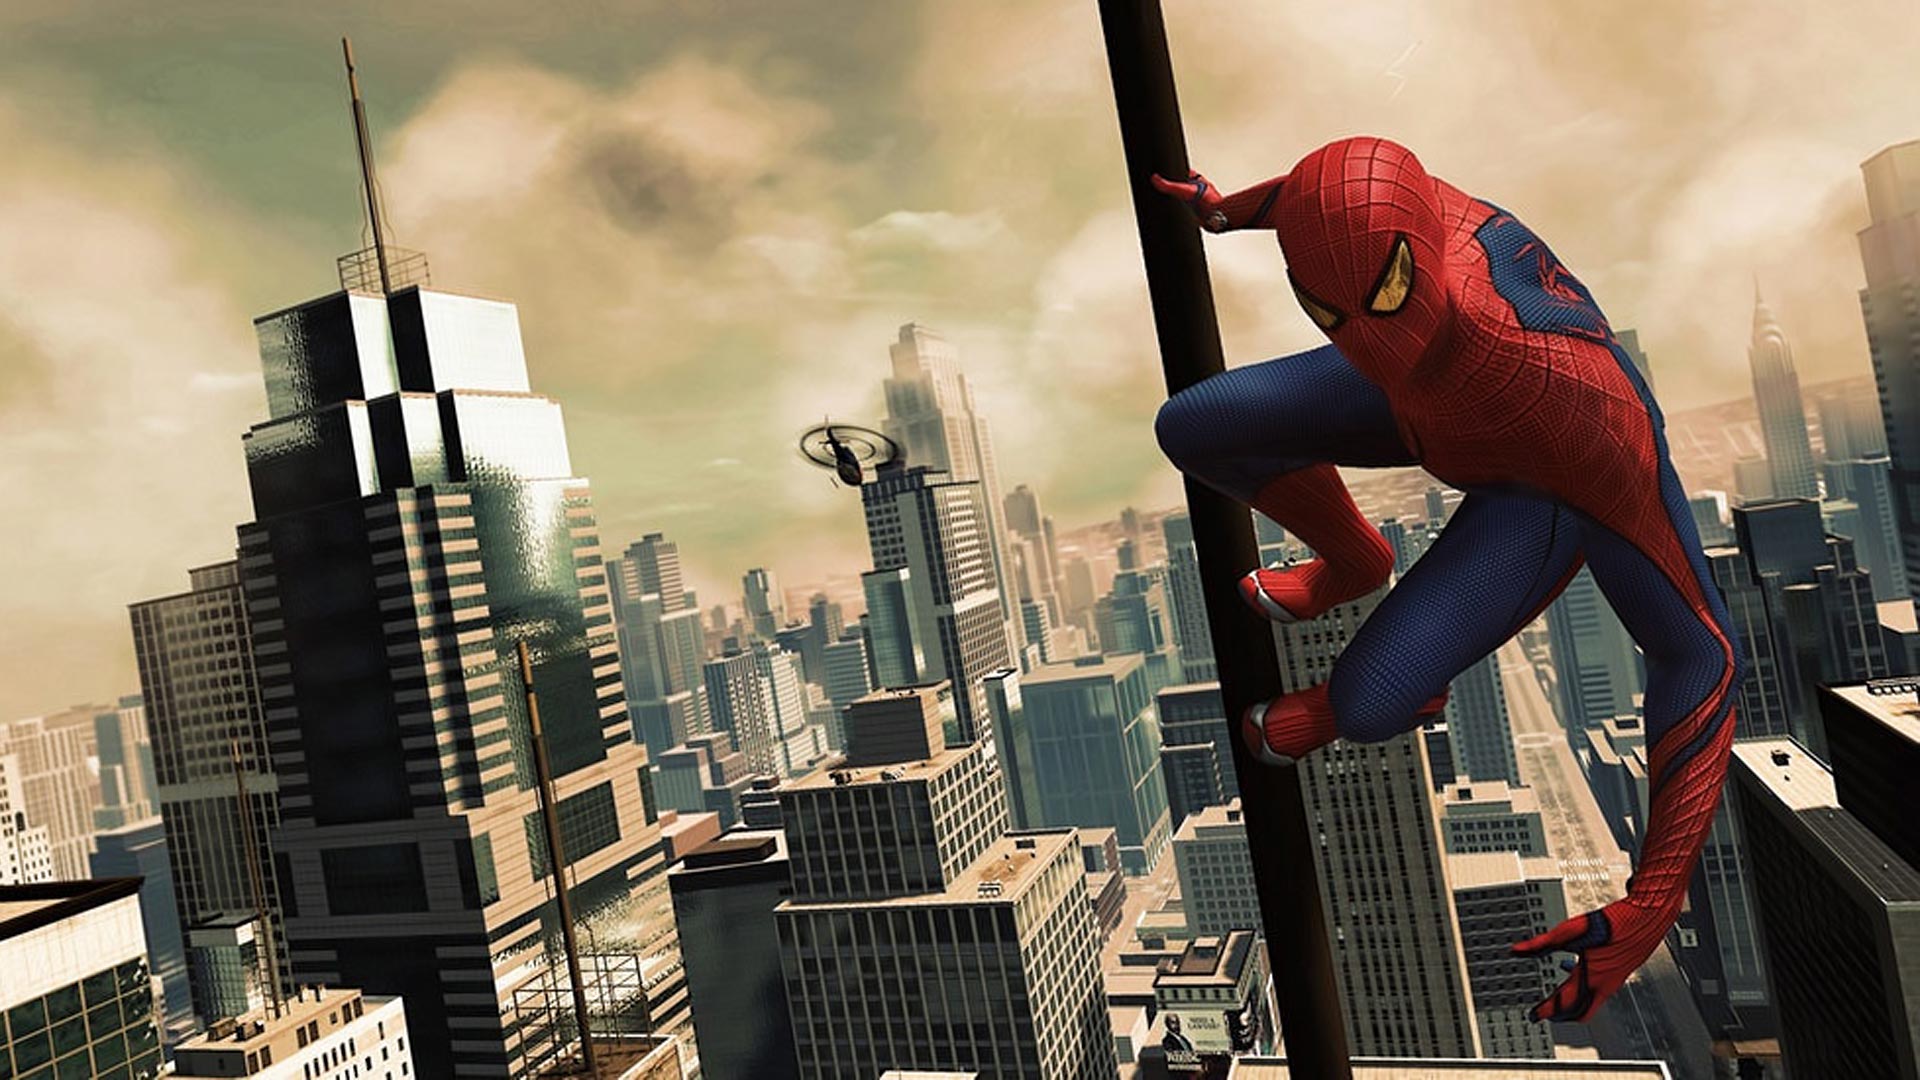 The amazing spider man hd wallpaper - Background Wallpapers for